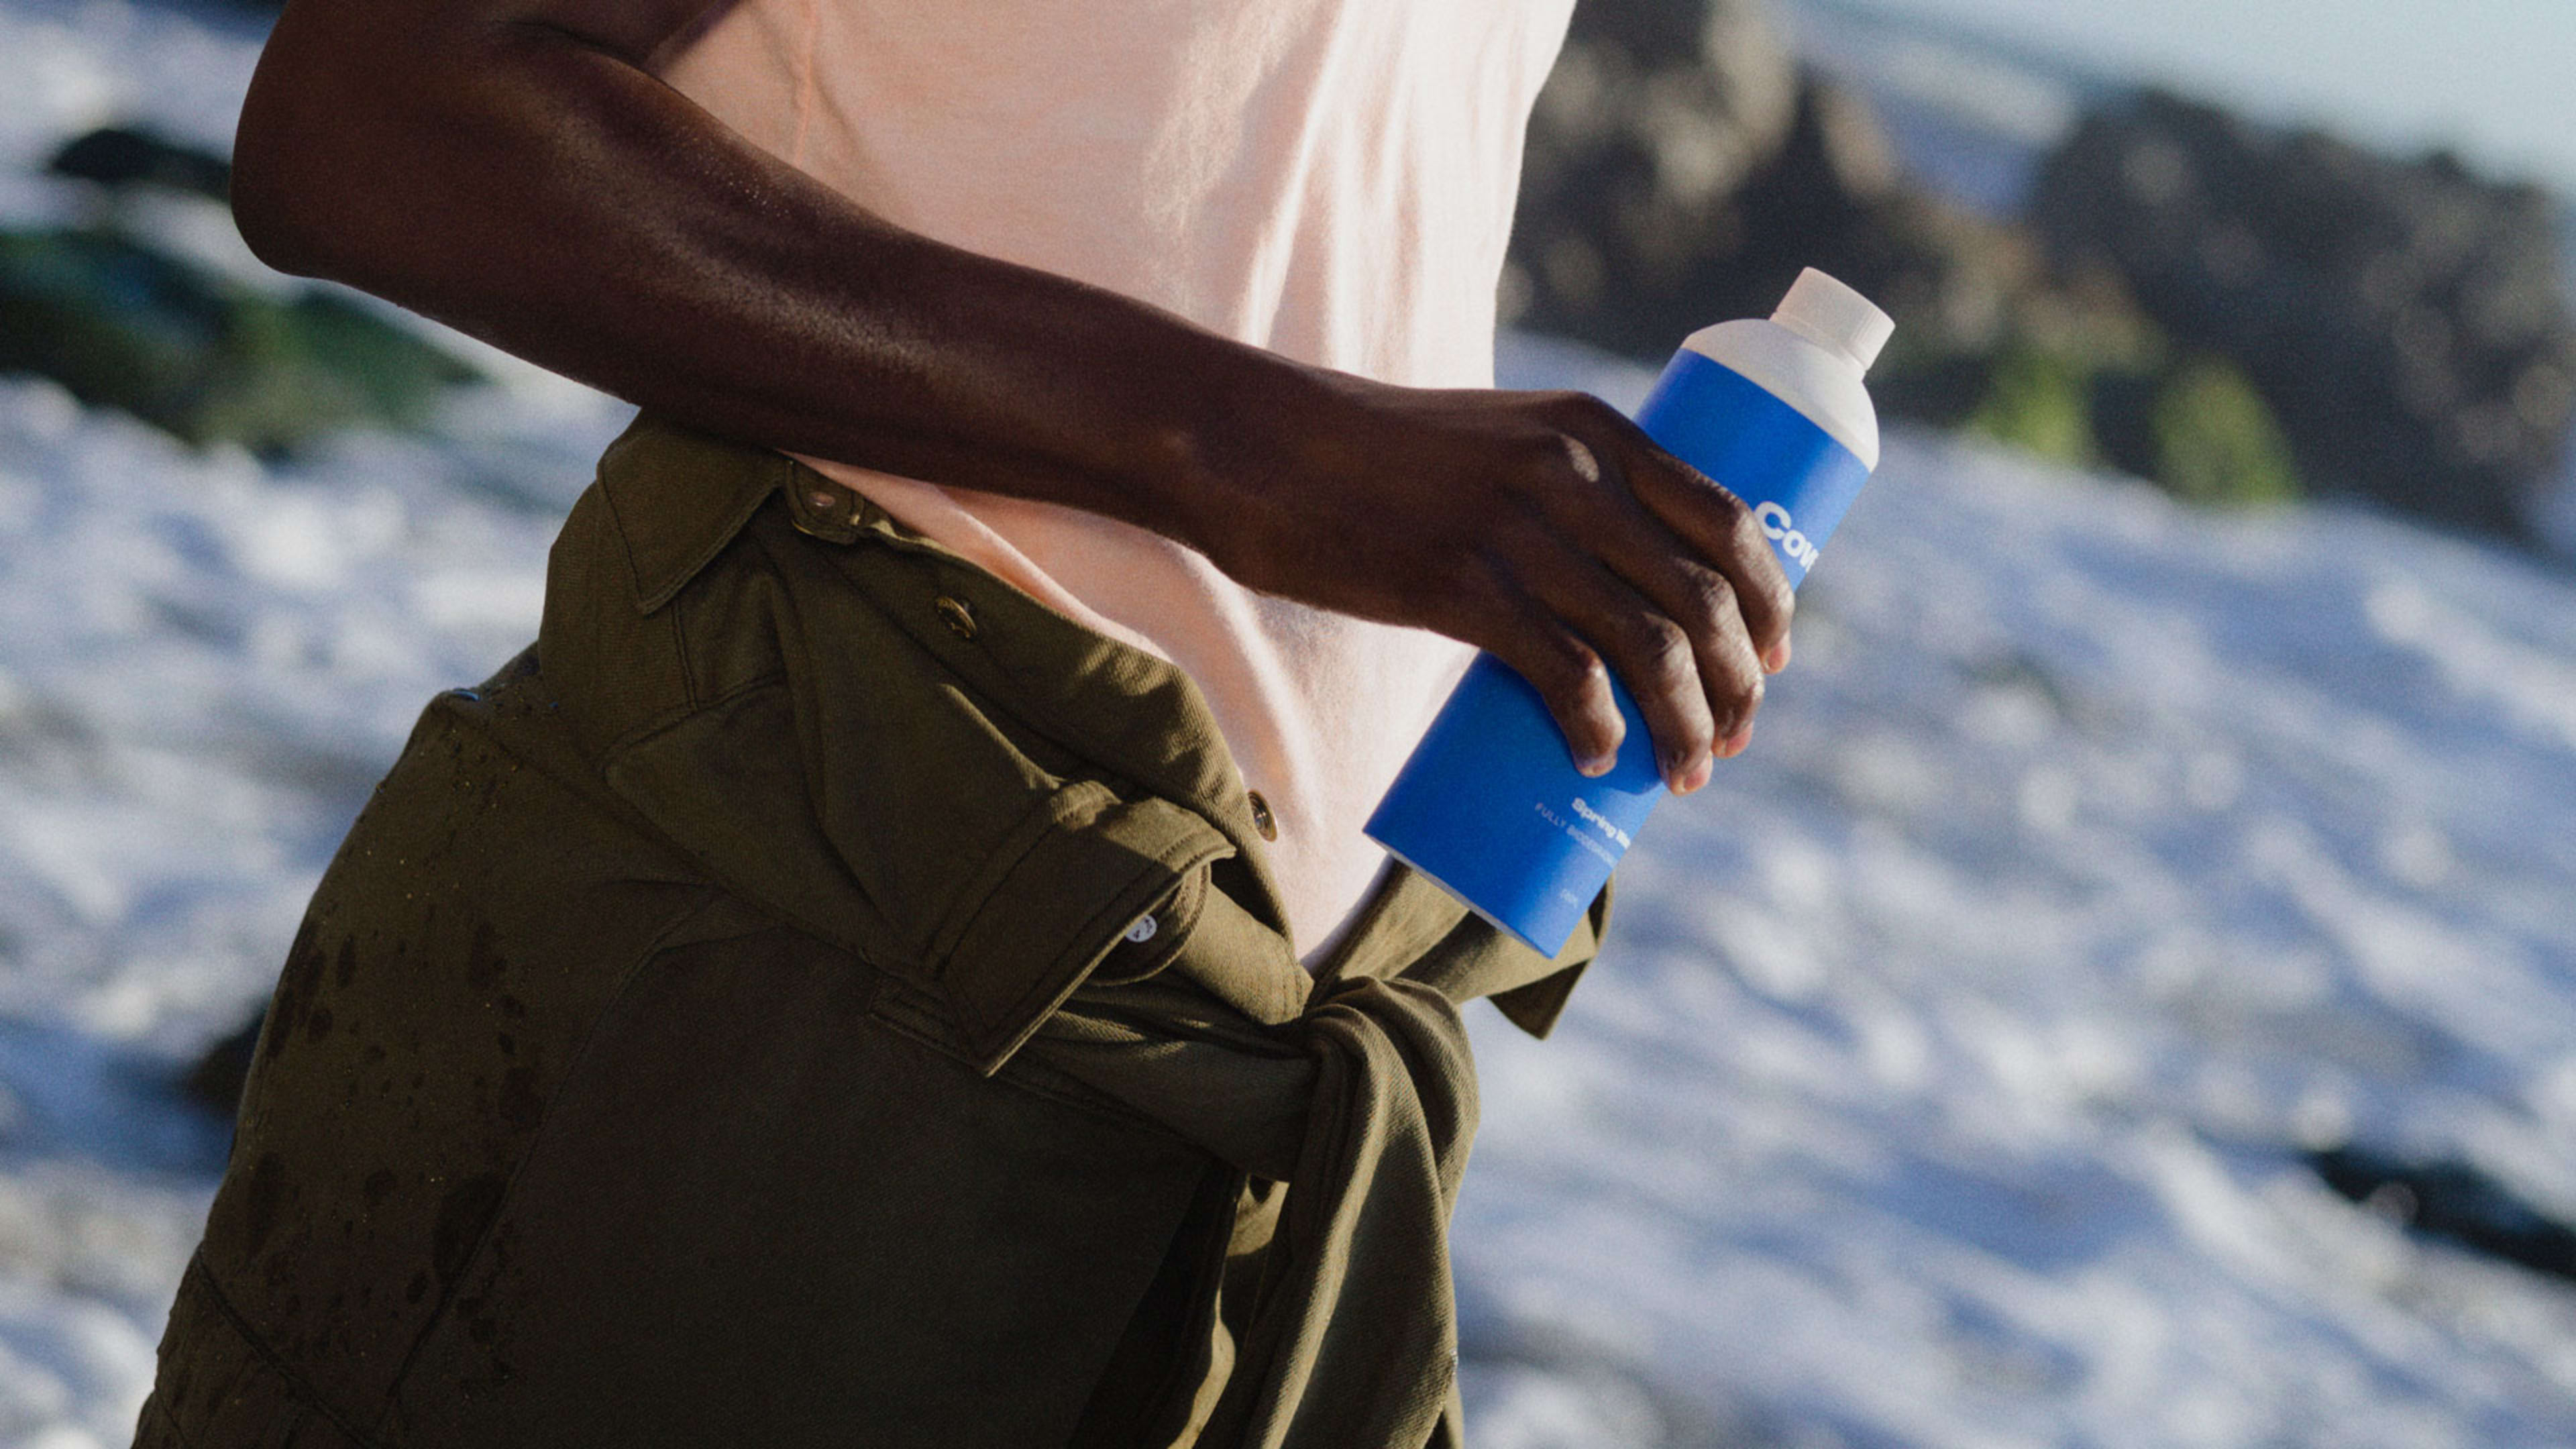 This new water company’s biodegradable bottle melts away if it ends up in the ocean